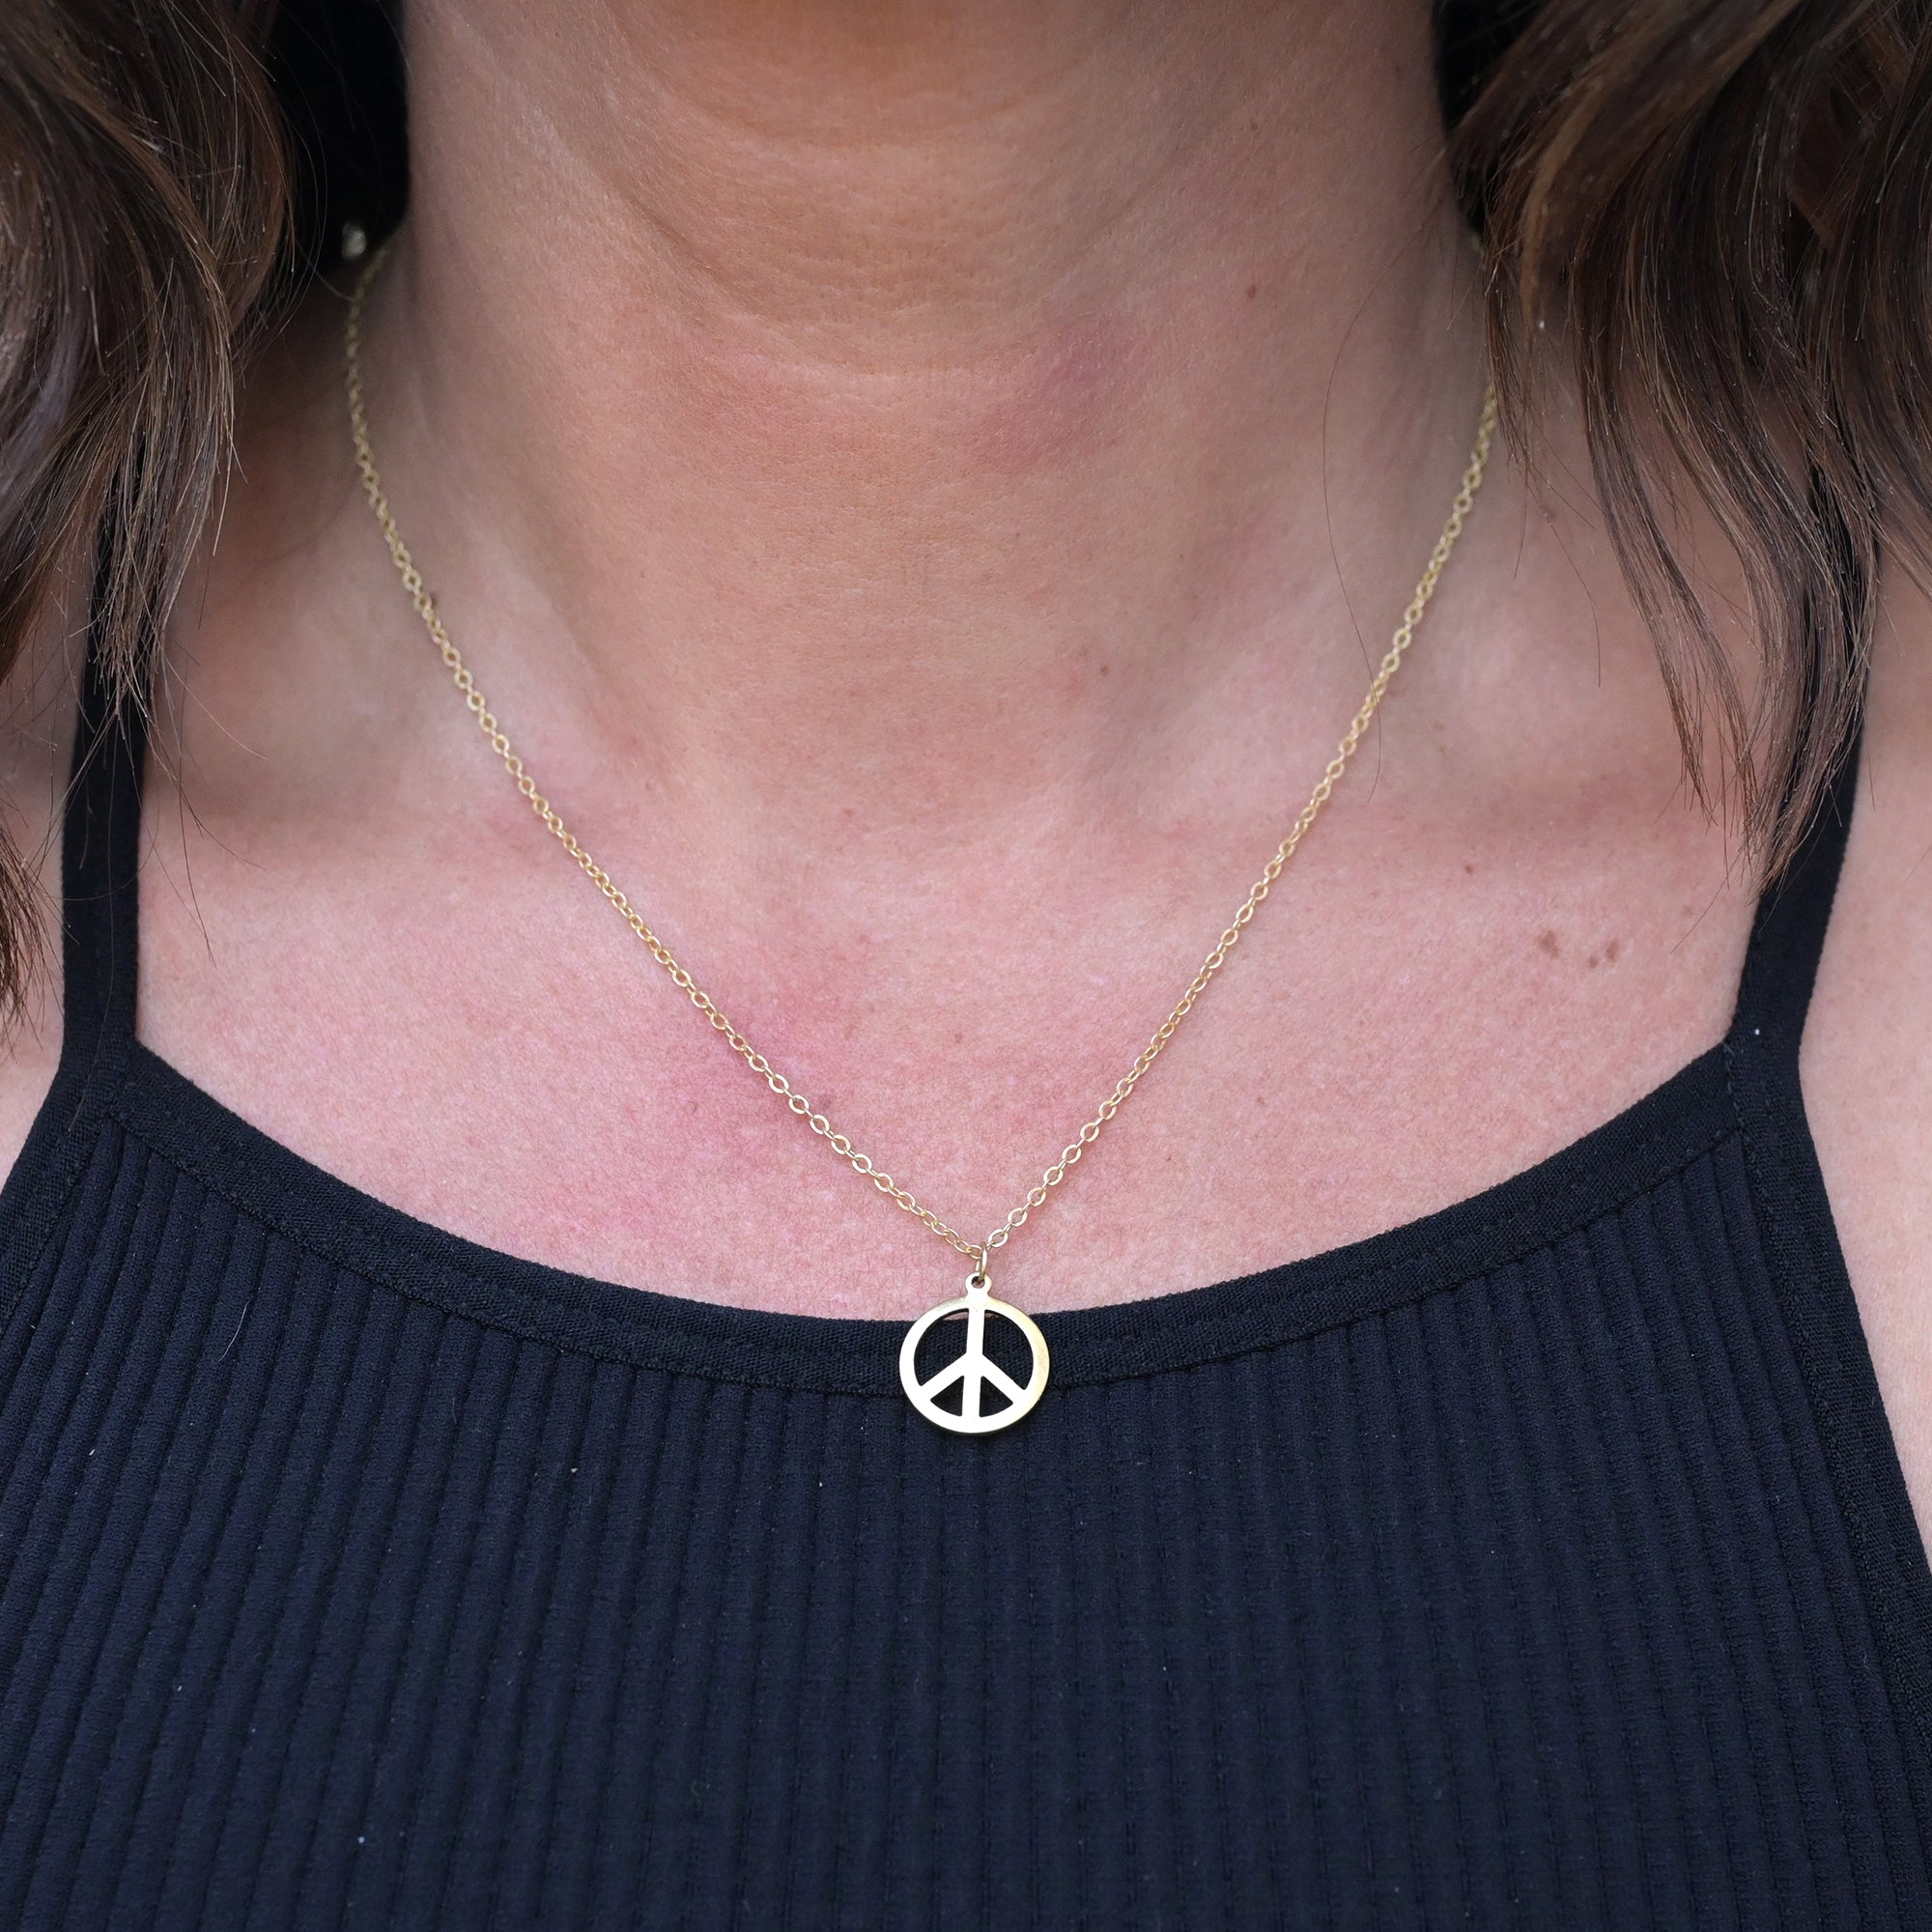 14K Gold Peace Sign Necklace - Jewelry